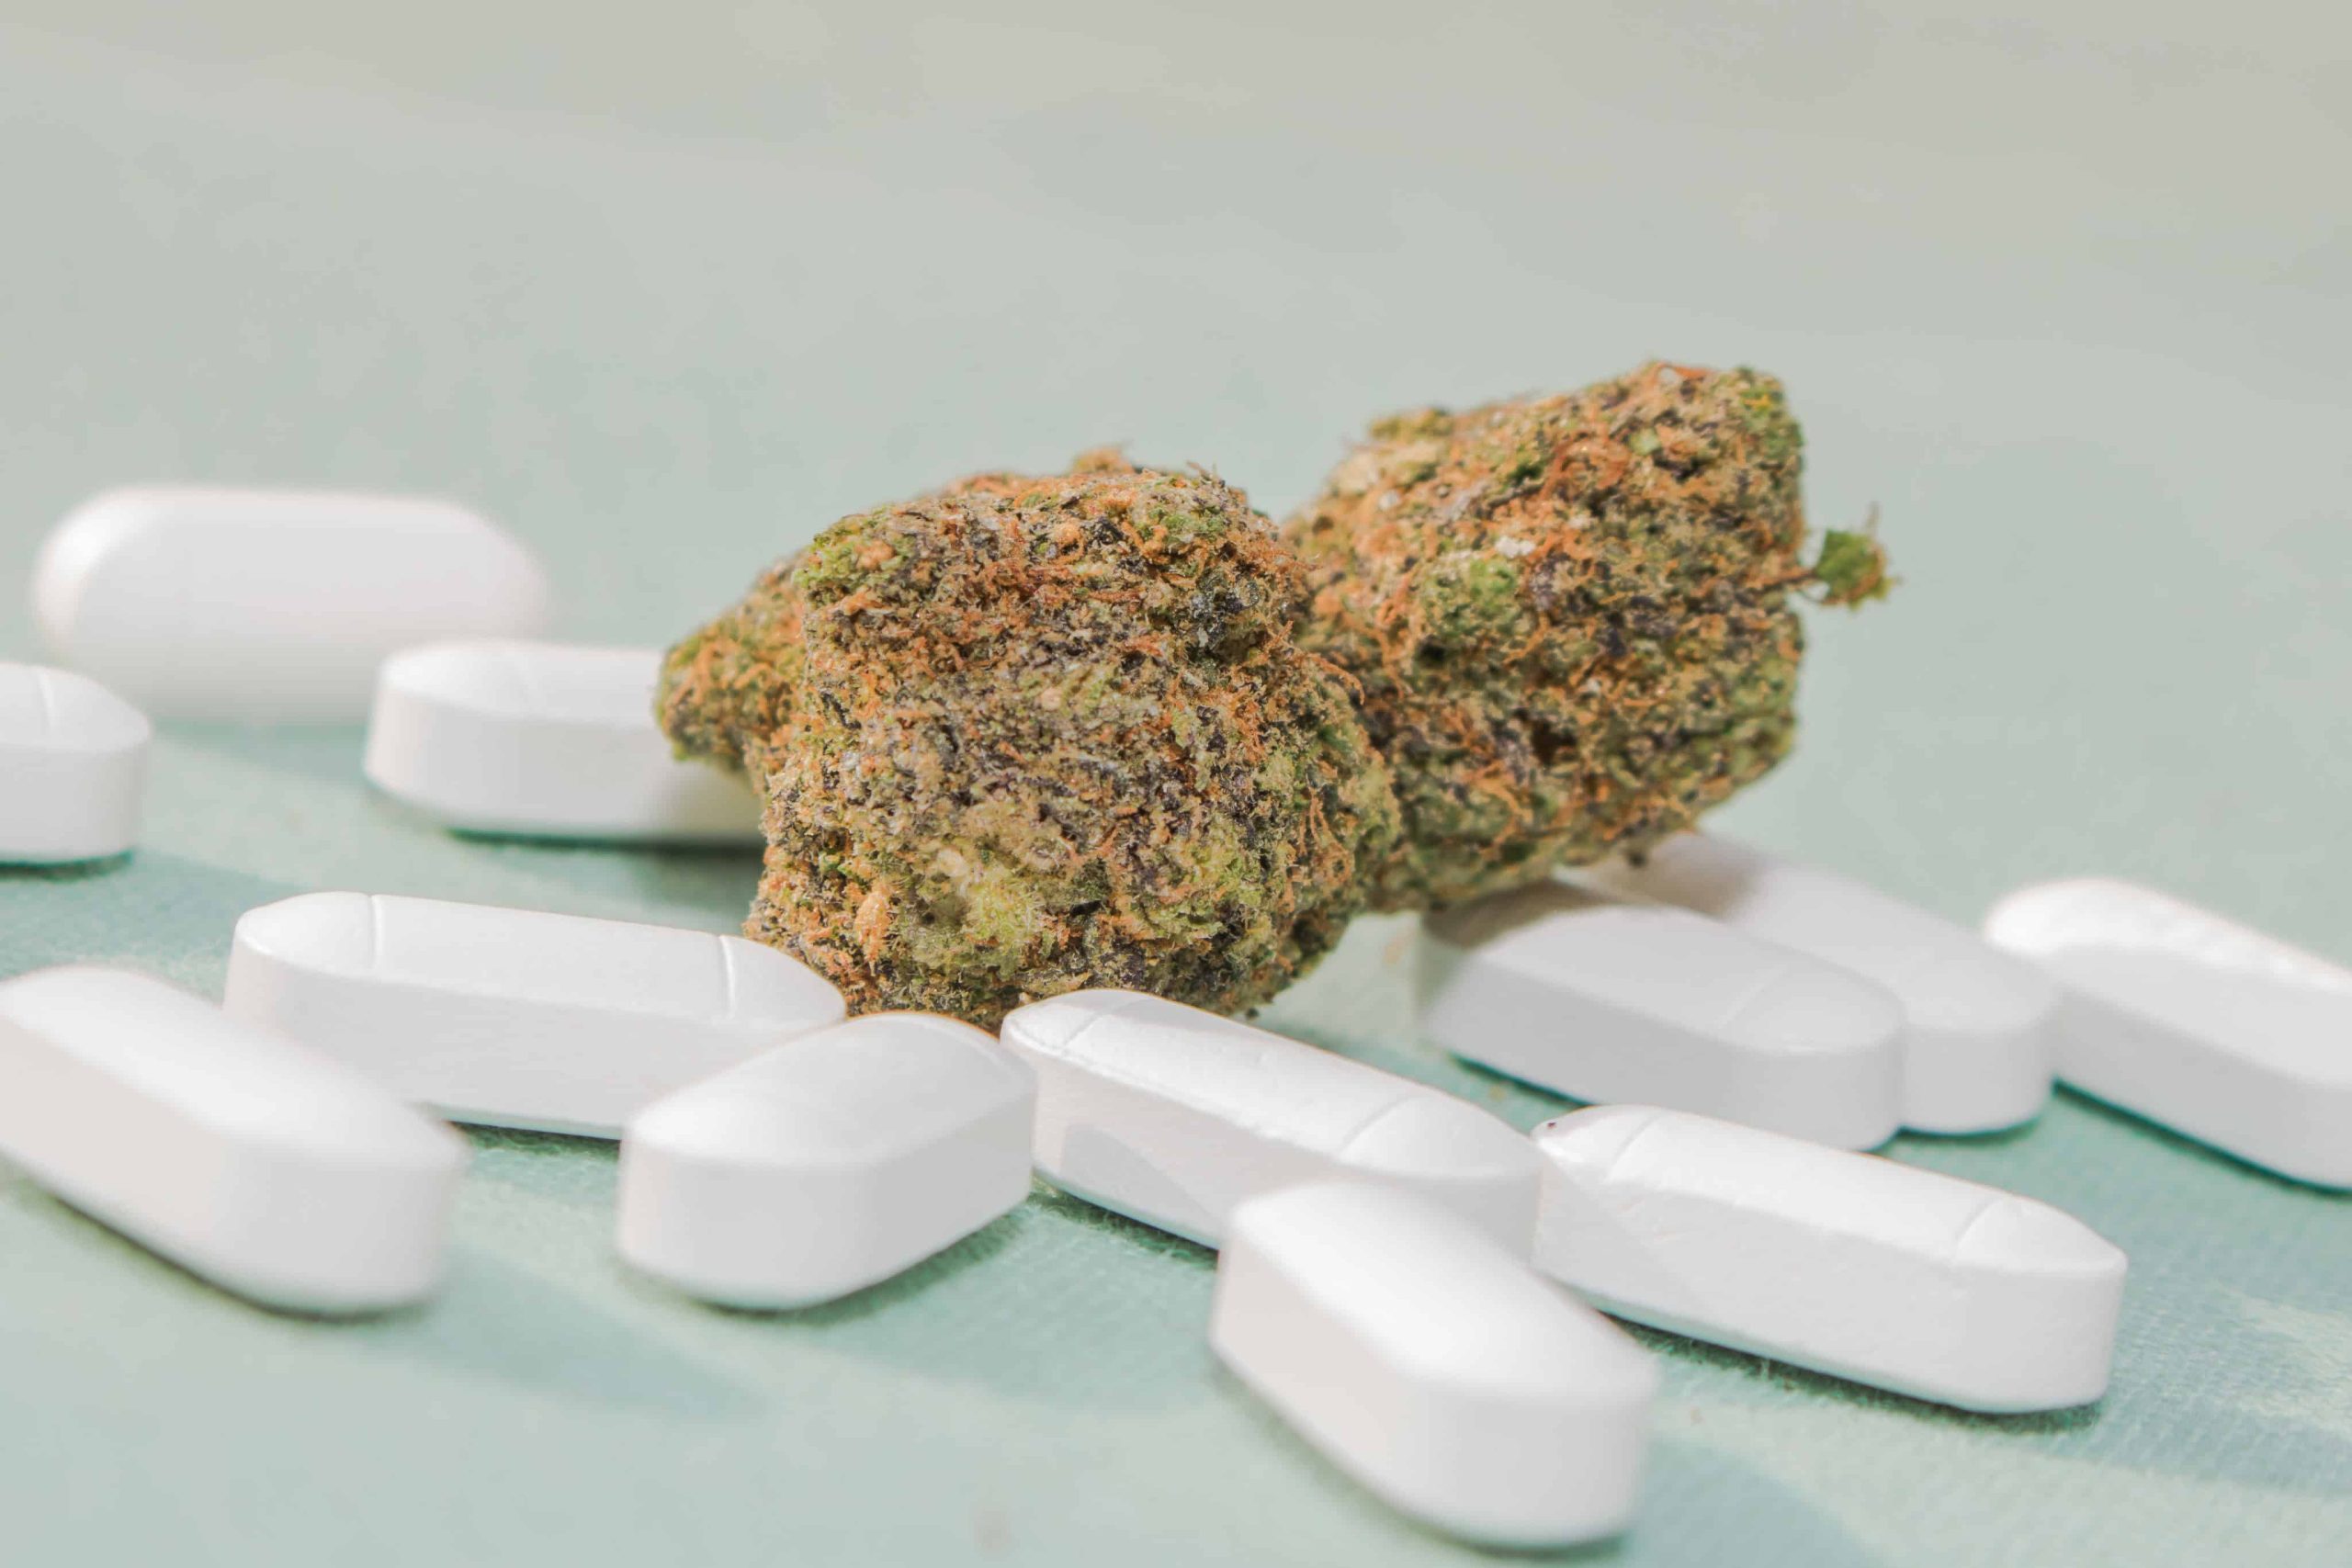 ‘Cannabis Use Disorder’ Pill Clinical Trial To Begin